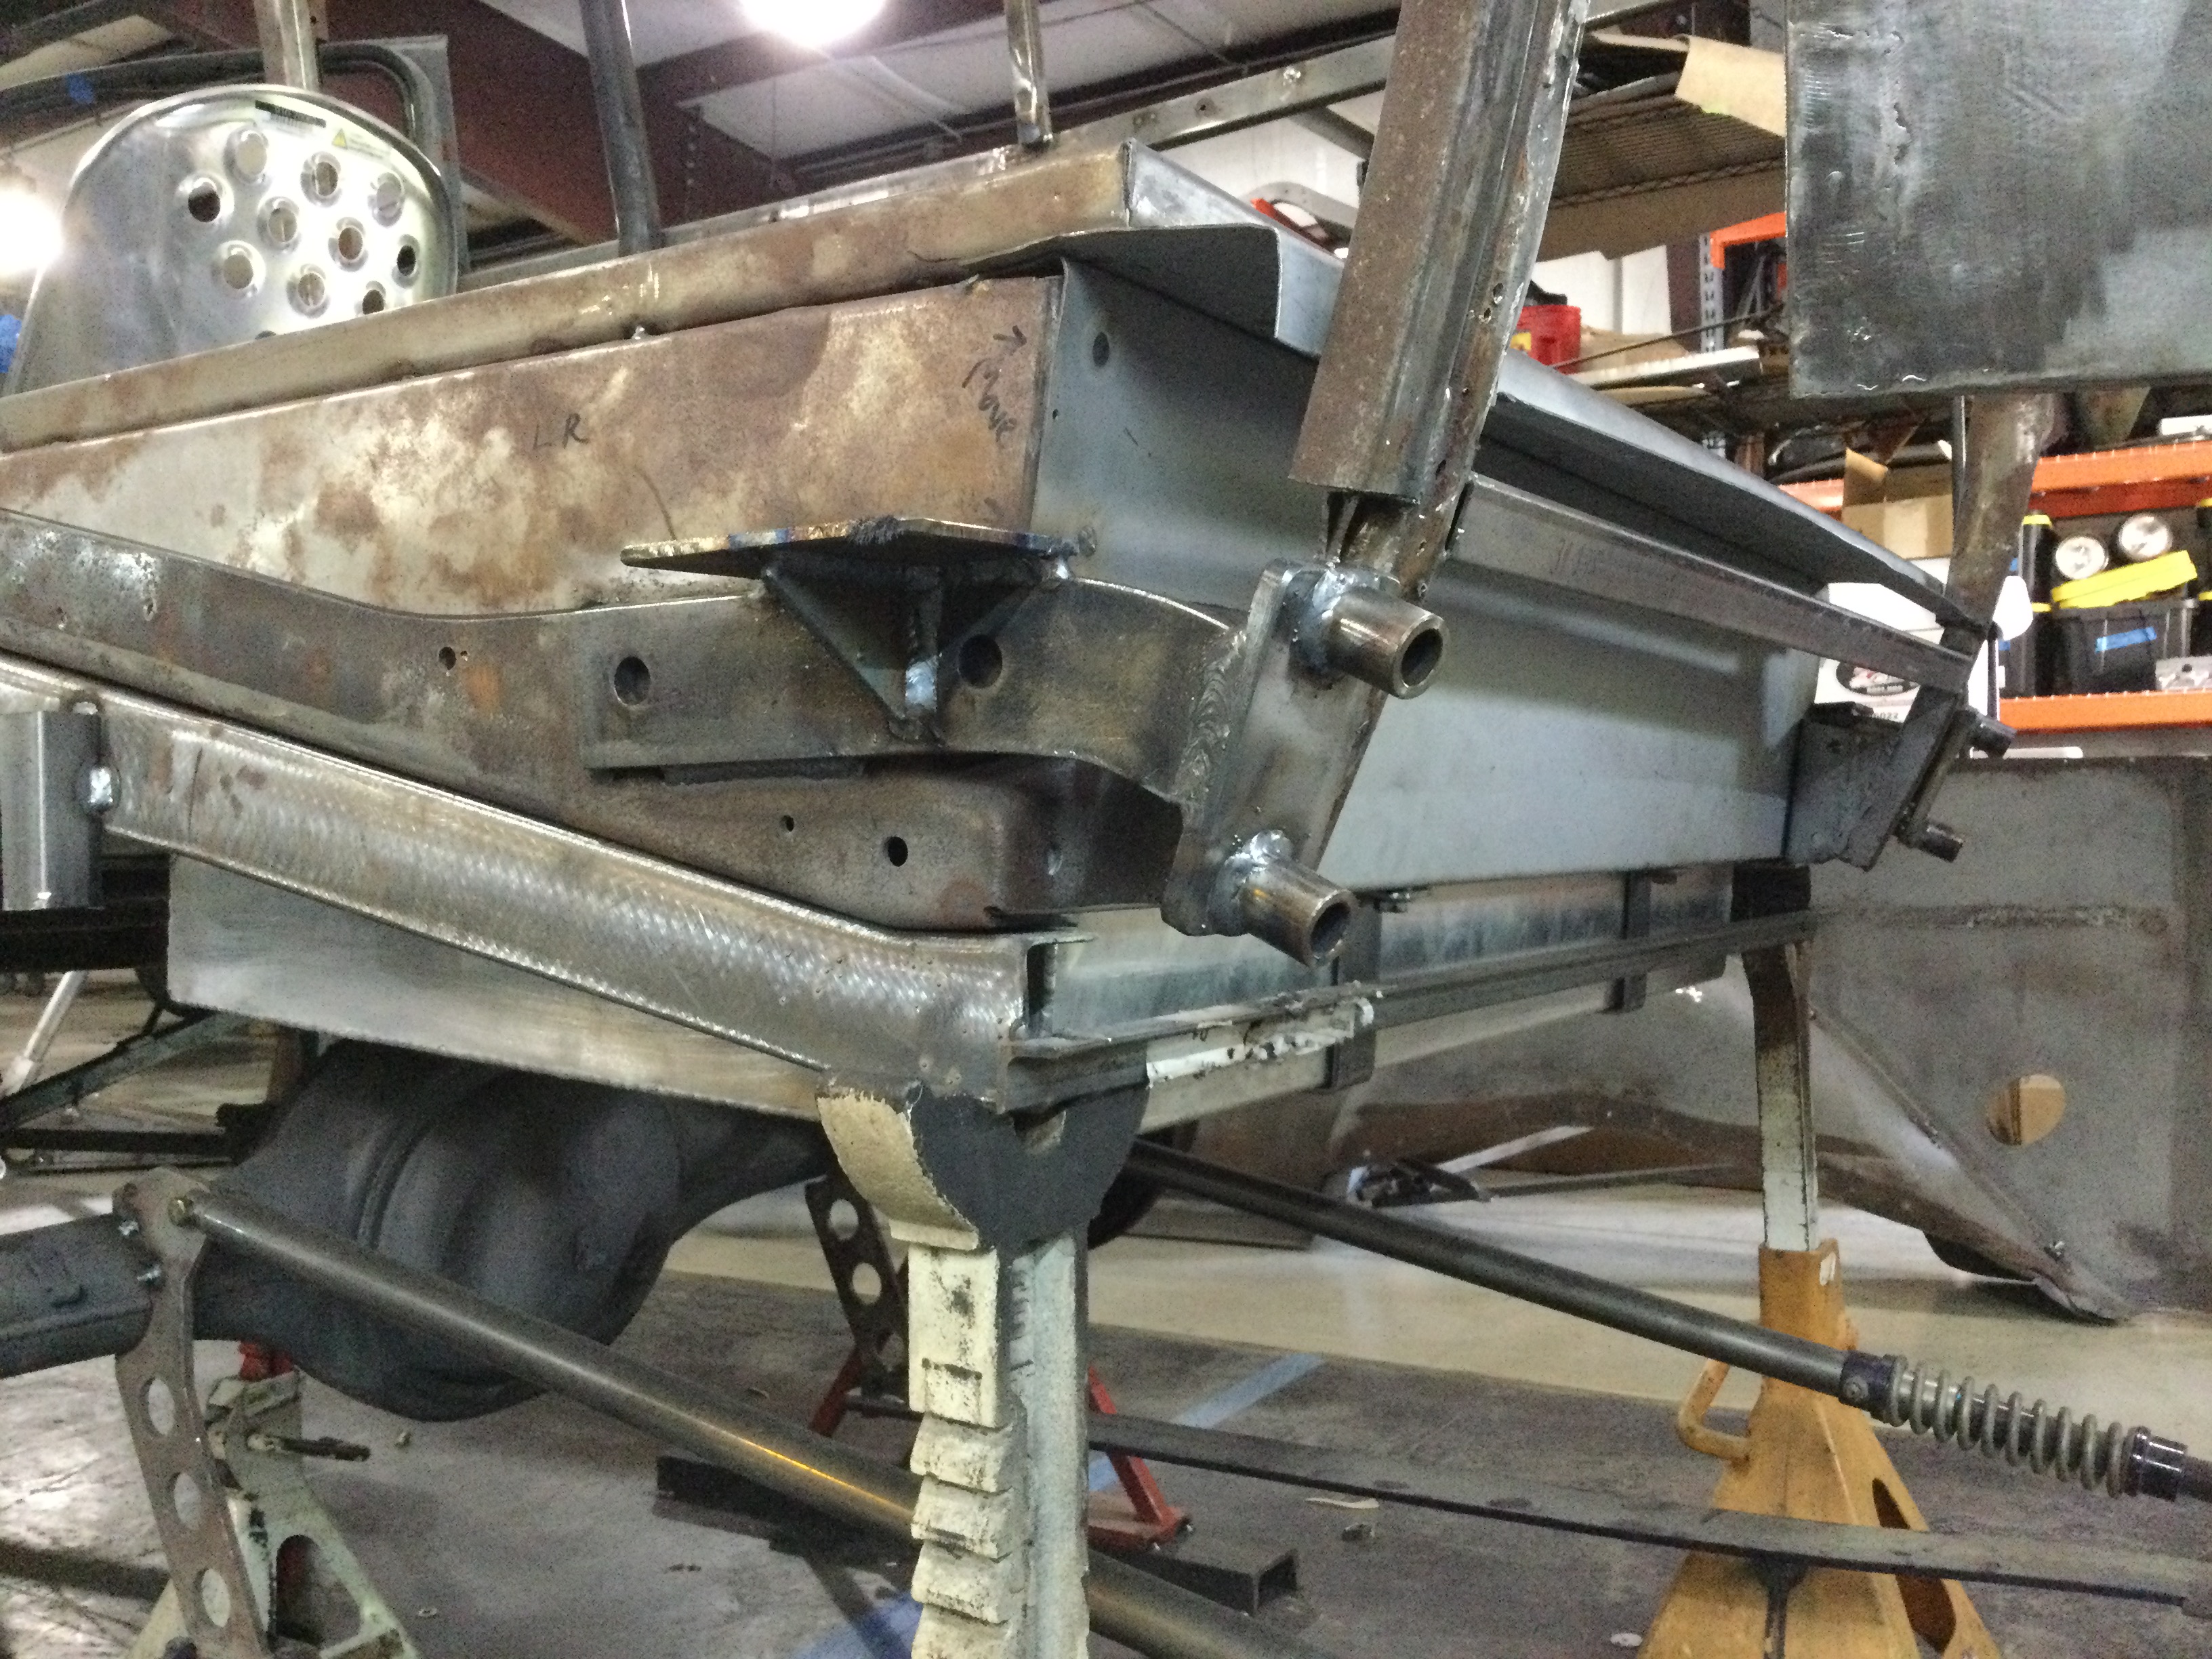 Adding structure to the Willys Gasser